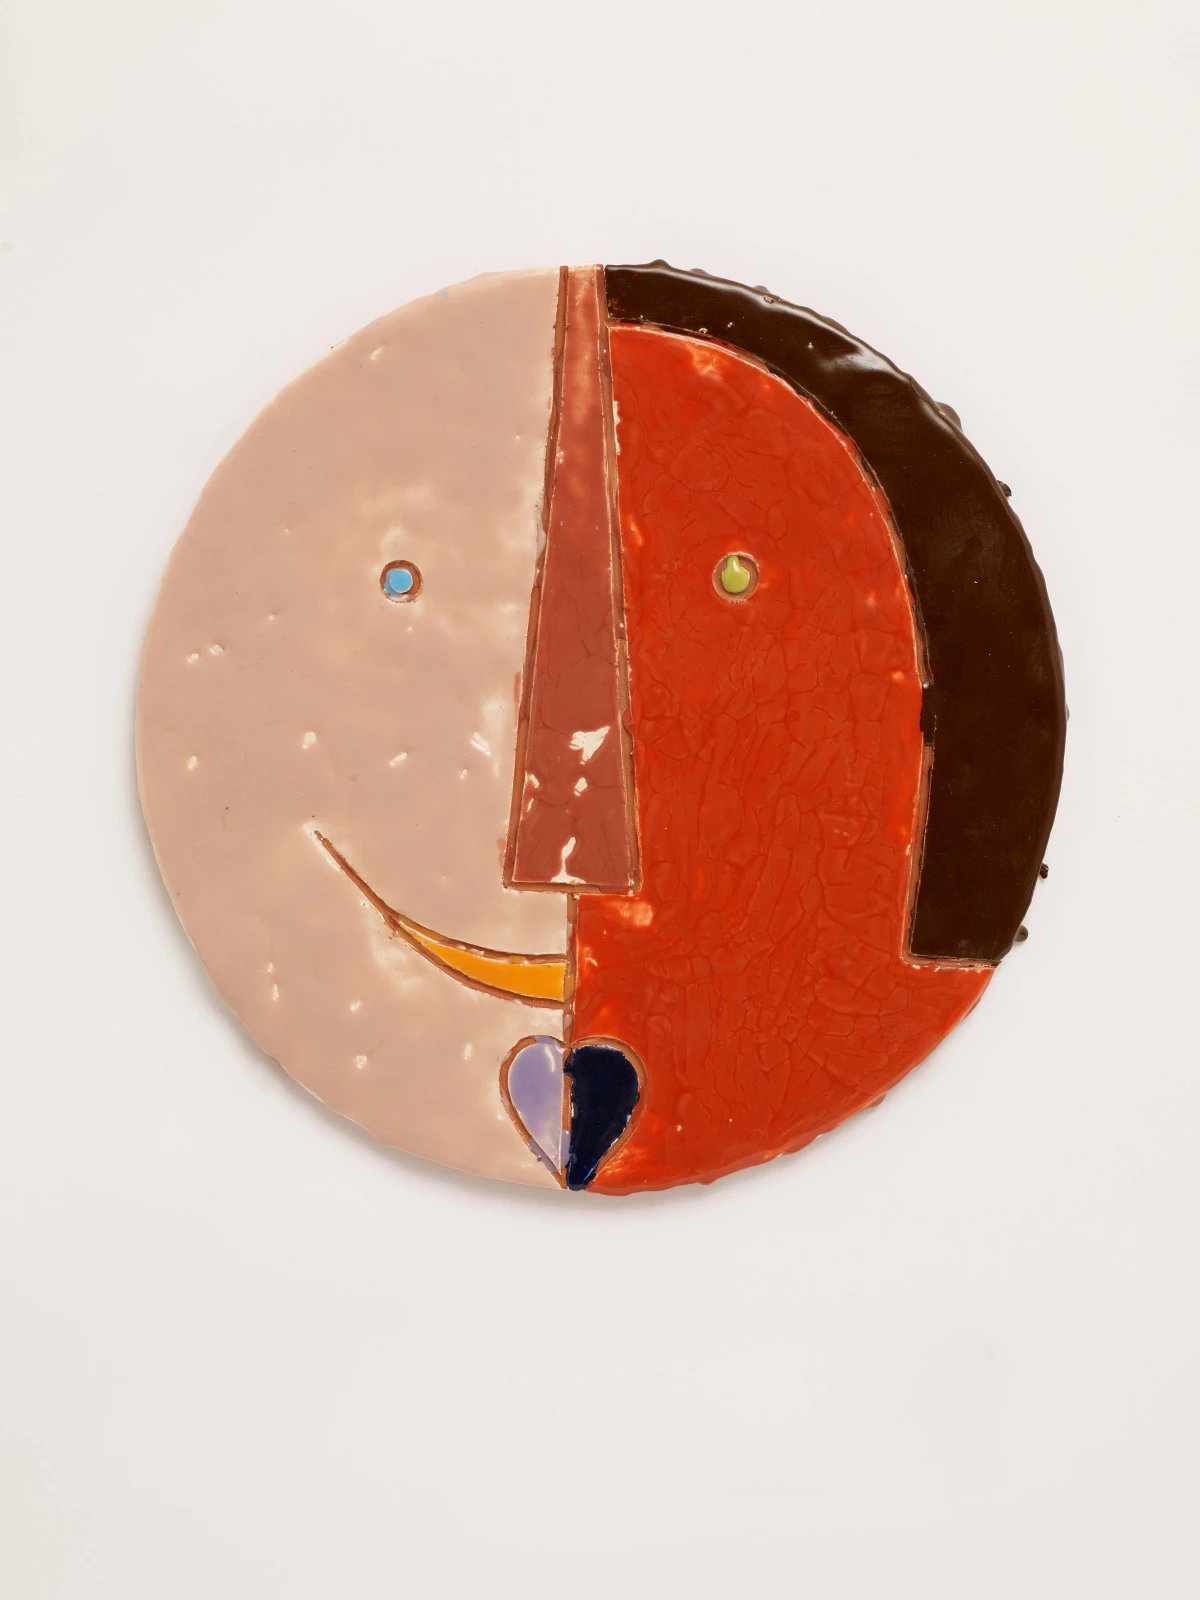 About the Artwork Polly Apfelbaum. Barn Face (brown Nose), 2021. Glazed Ceramic. 49 X 49 X 2.2 Cm  by Polly Apfelbaum